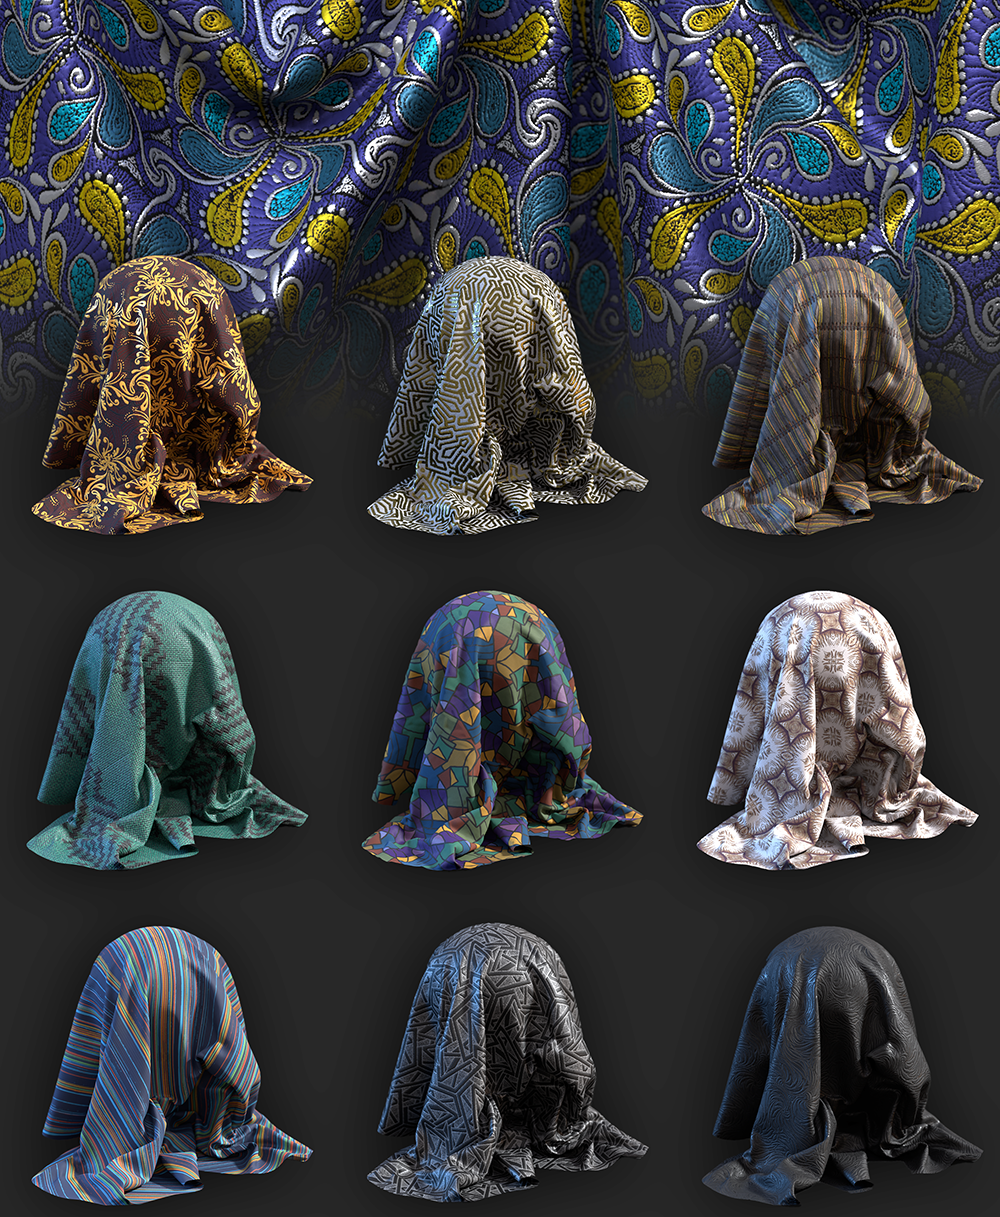 Cloth and Drapery Brushes Pack